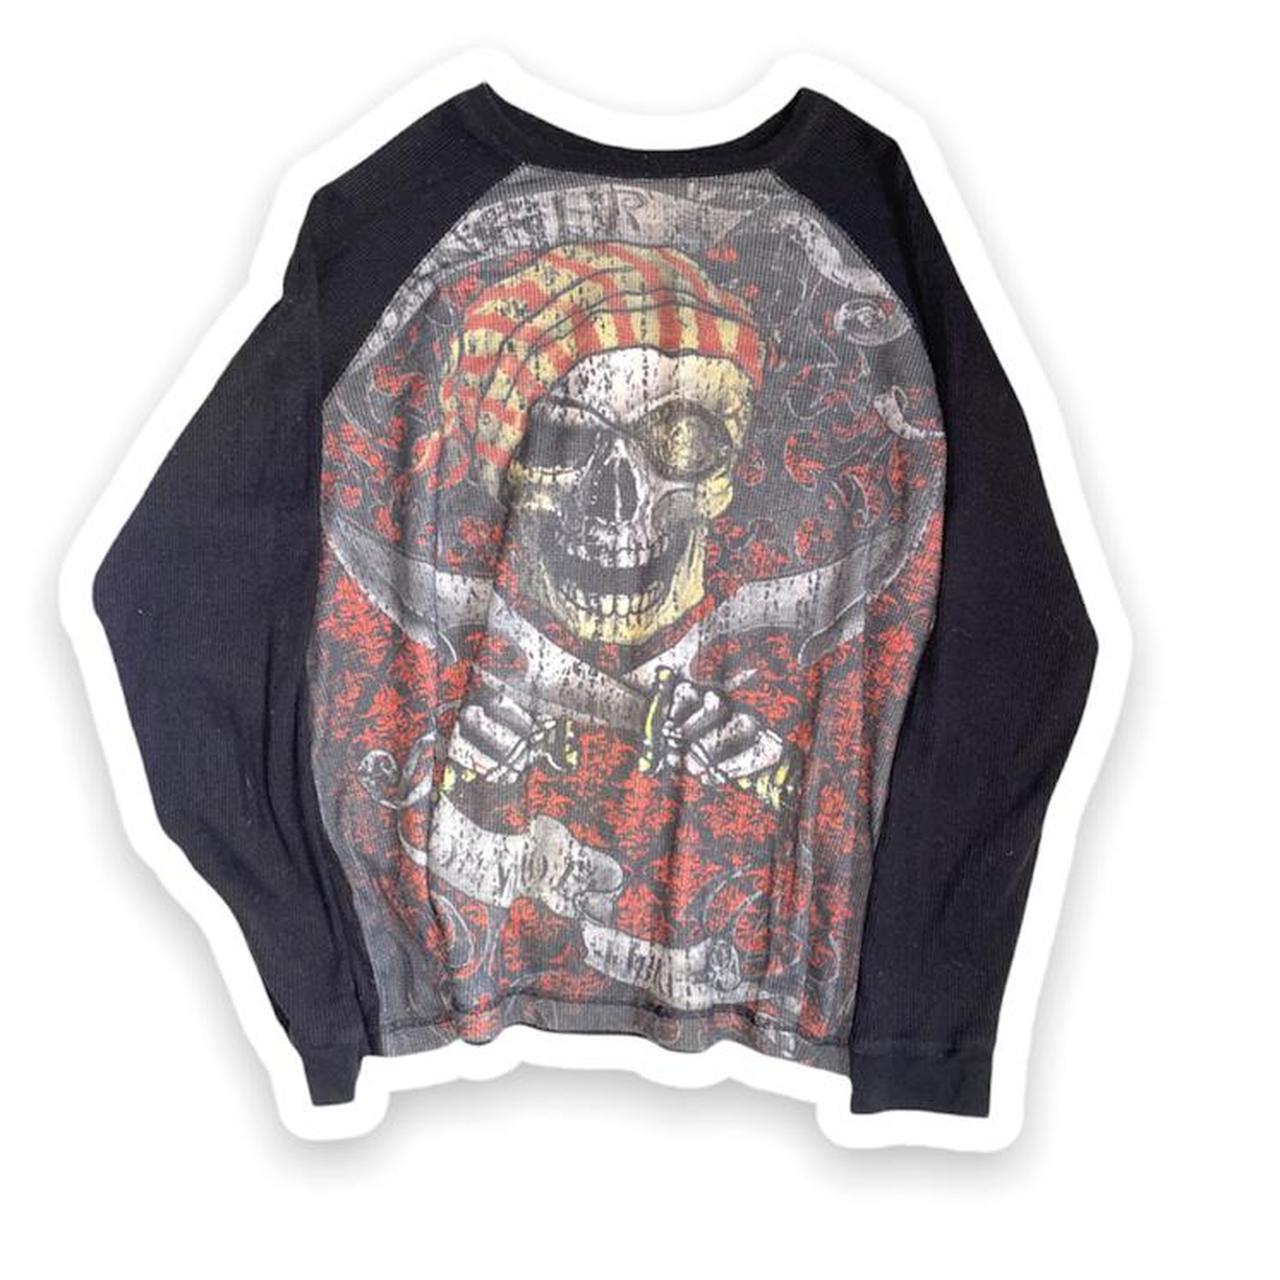 Product Image 1 - 🎱SKULLY oversized pirate thermal🎱
Such a